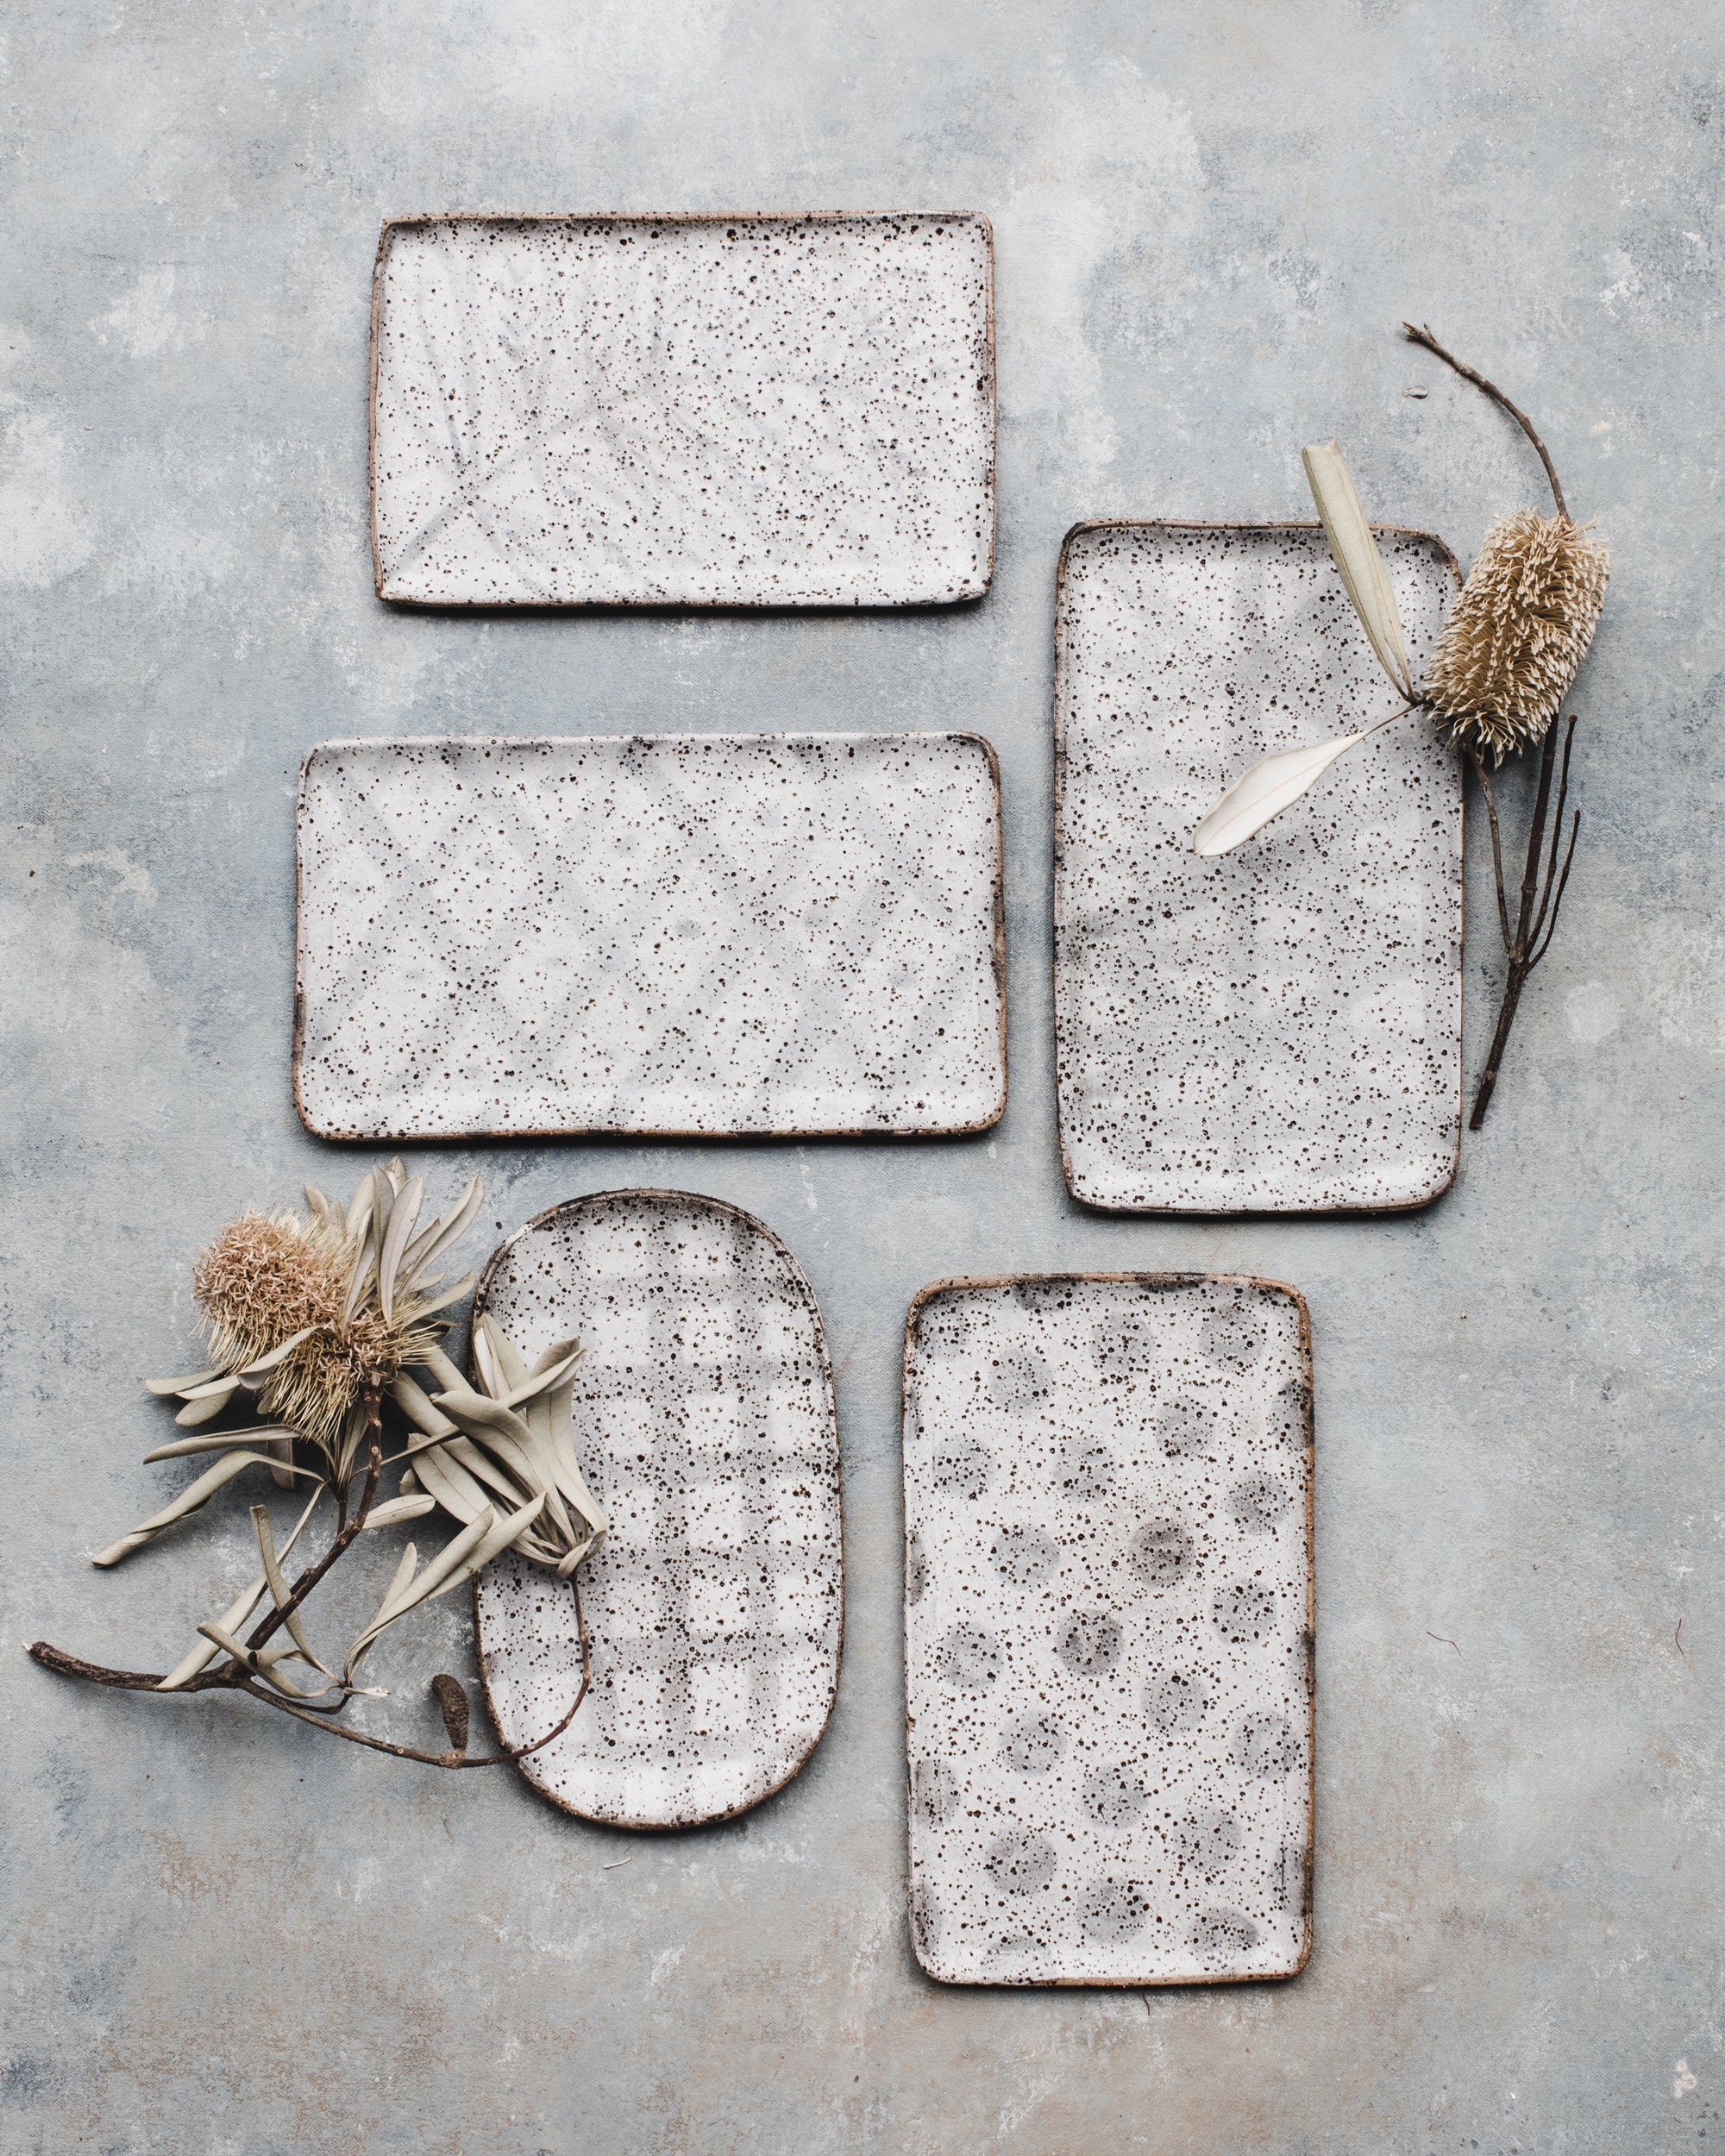 Rustic speckled rectangular tray/plates in grey and white finish handmade by clay beehive ceramics